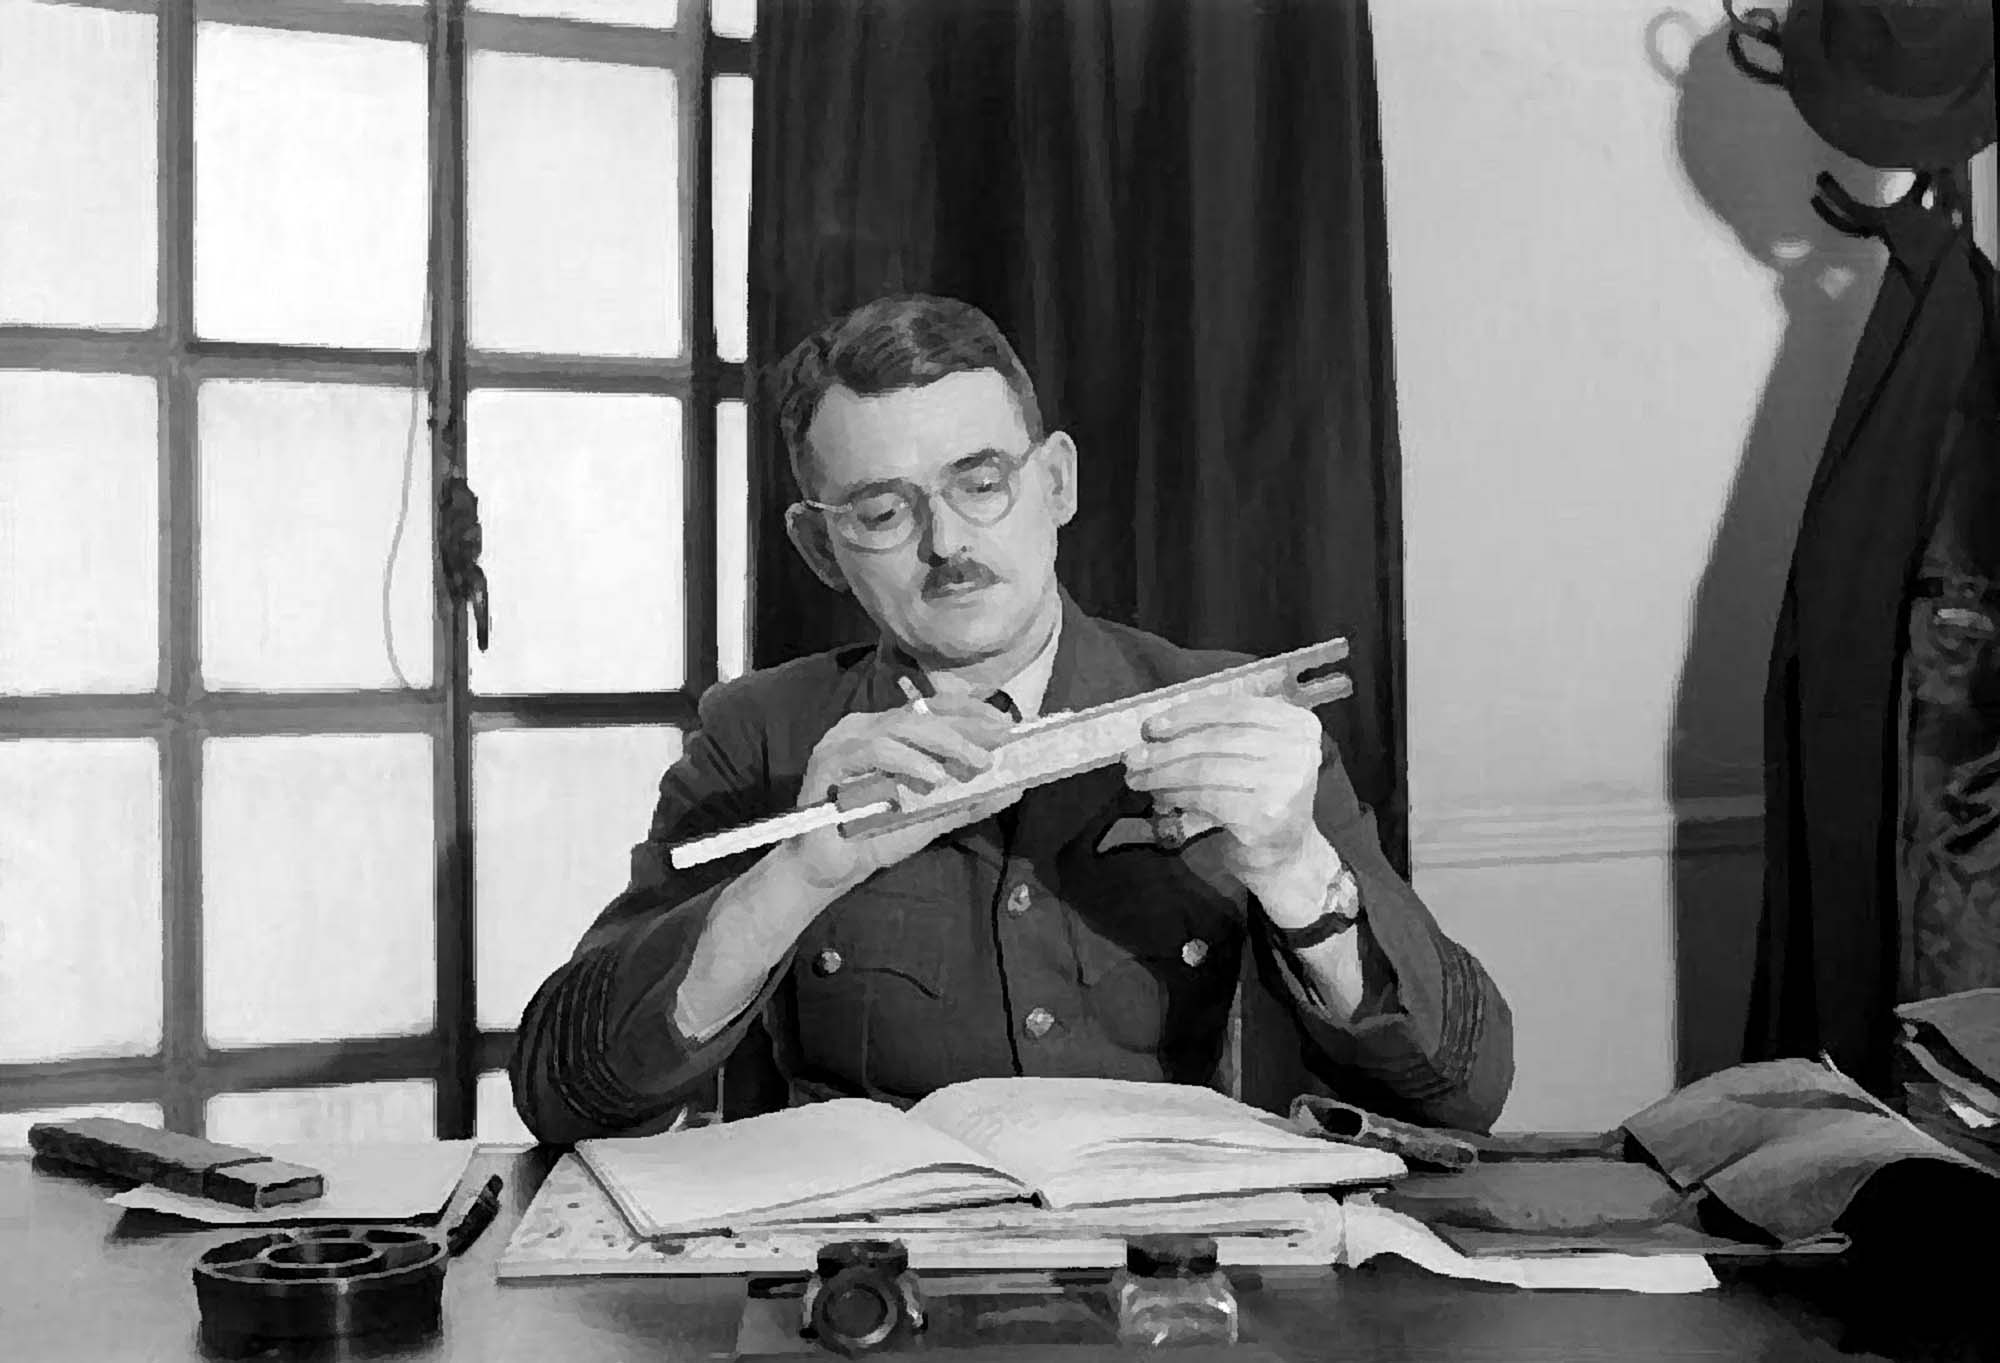 Frank Whittle adjusts a slide rule while seated at his desk at the Ministry of Aircraft Production - Imperial War Museums